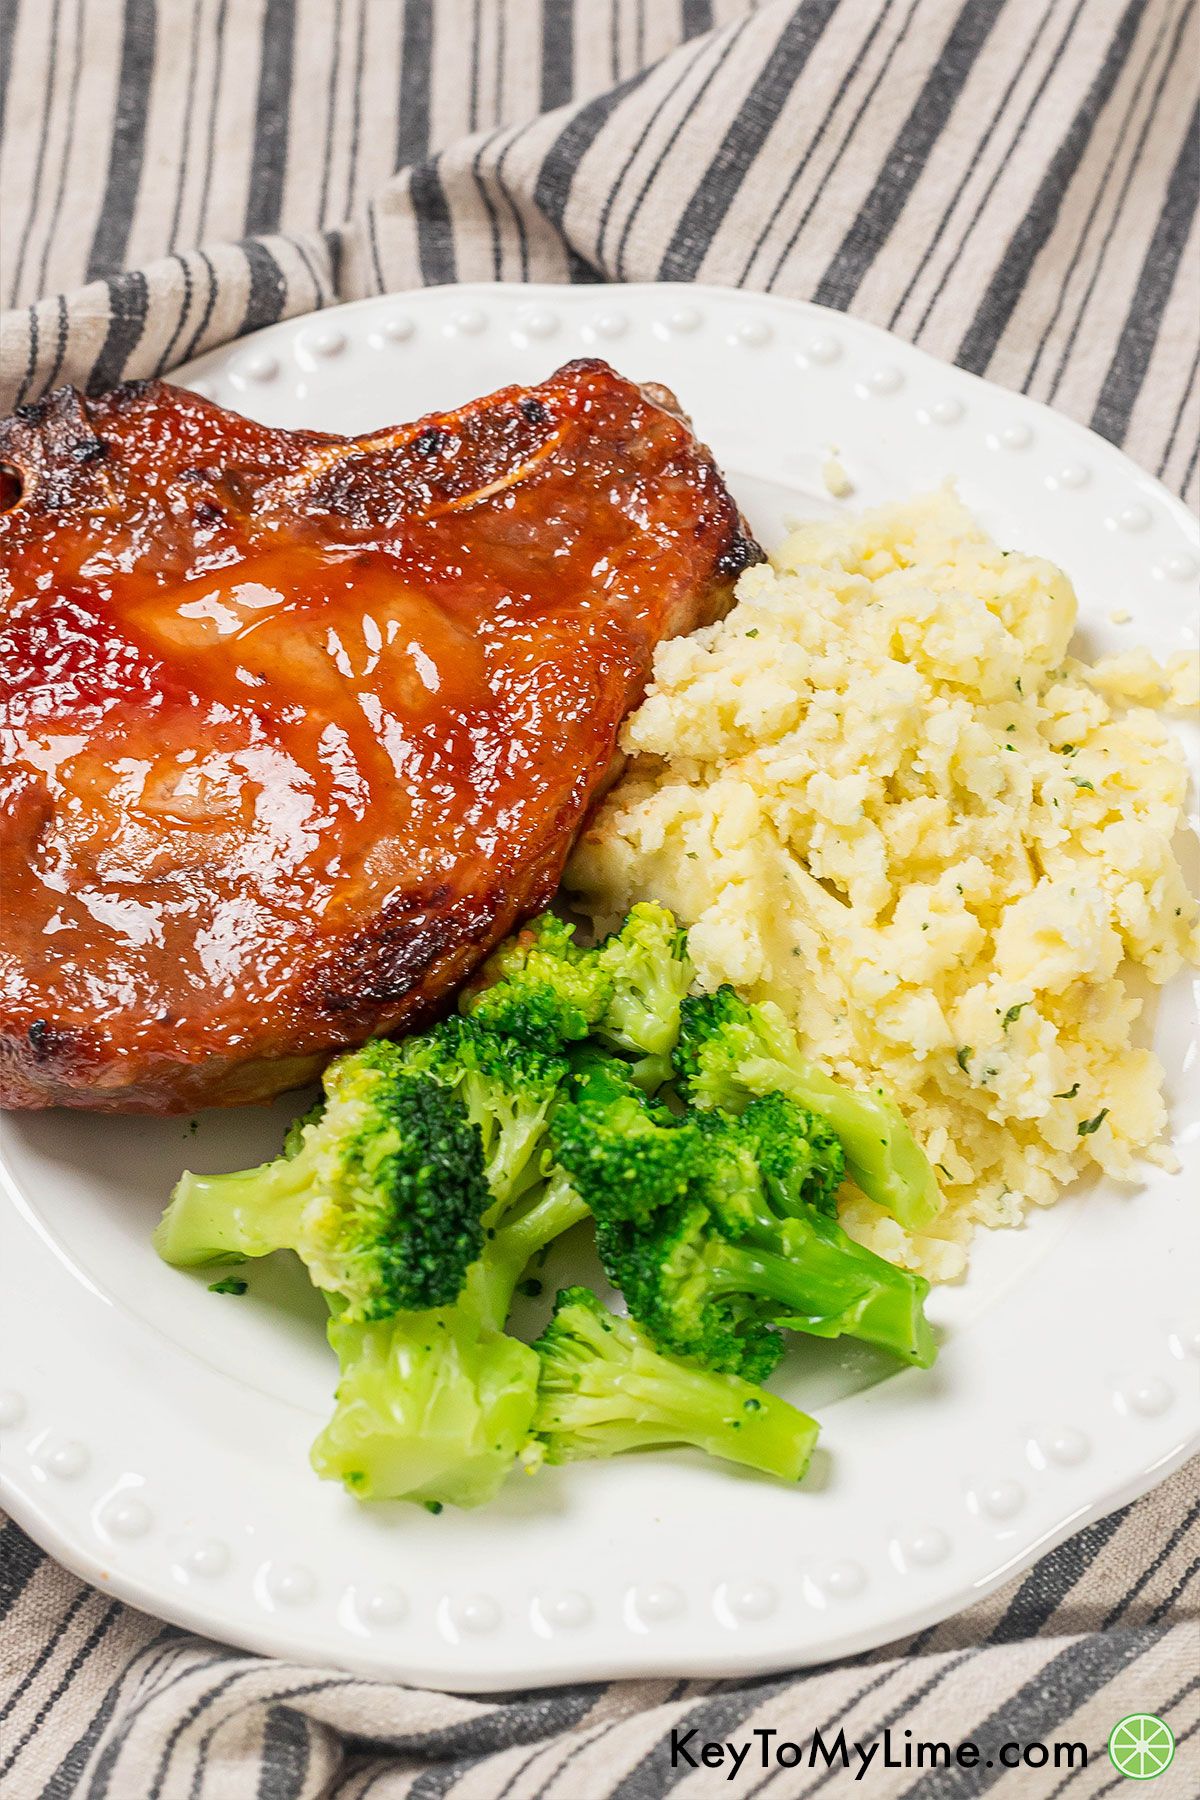 An image of plated pork chops with broccoli and potatoes.